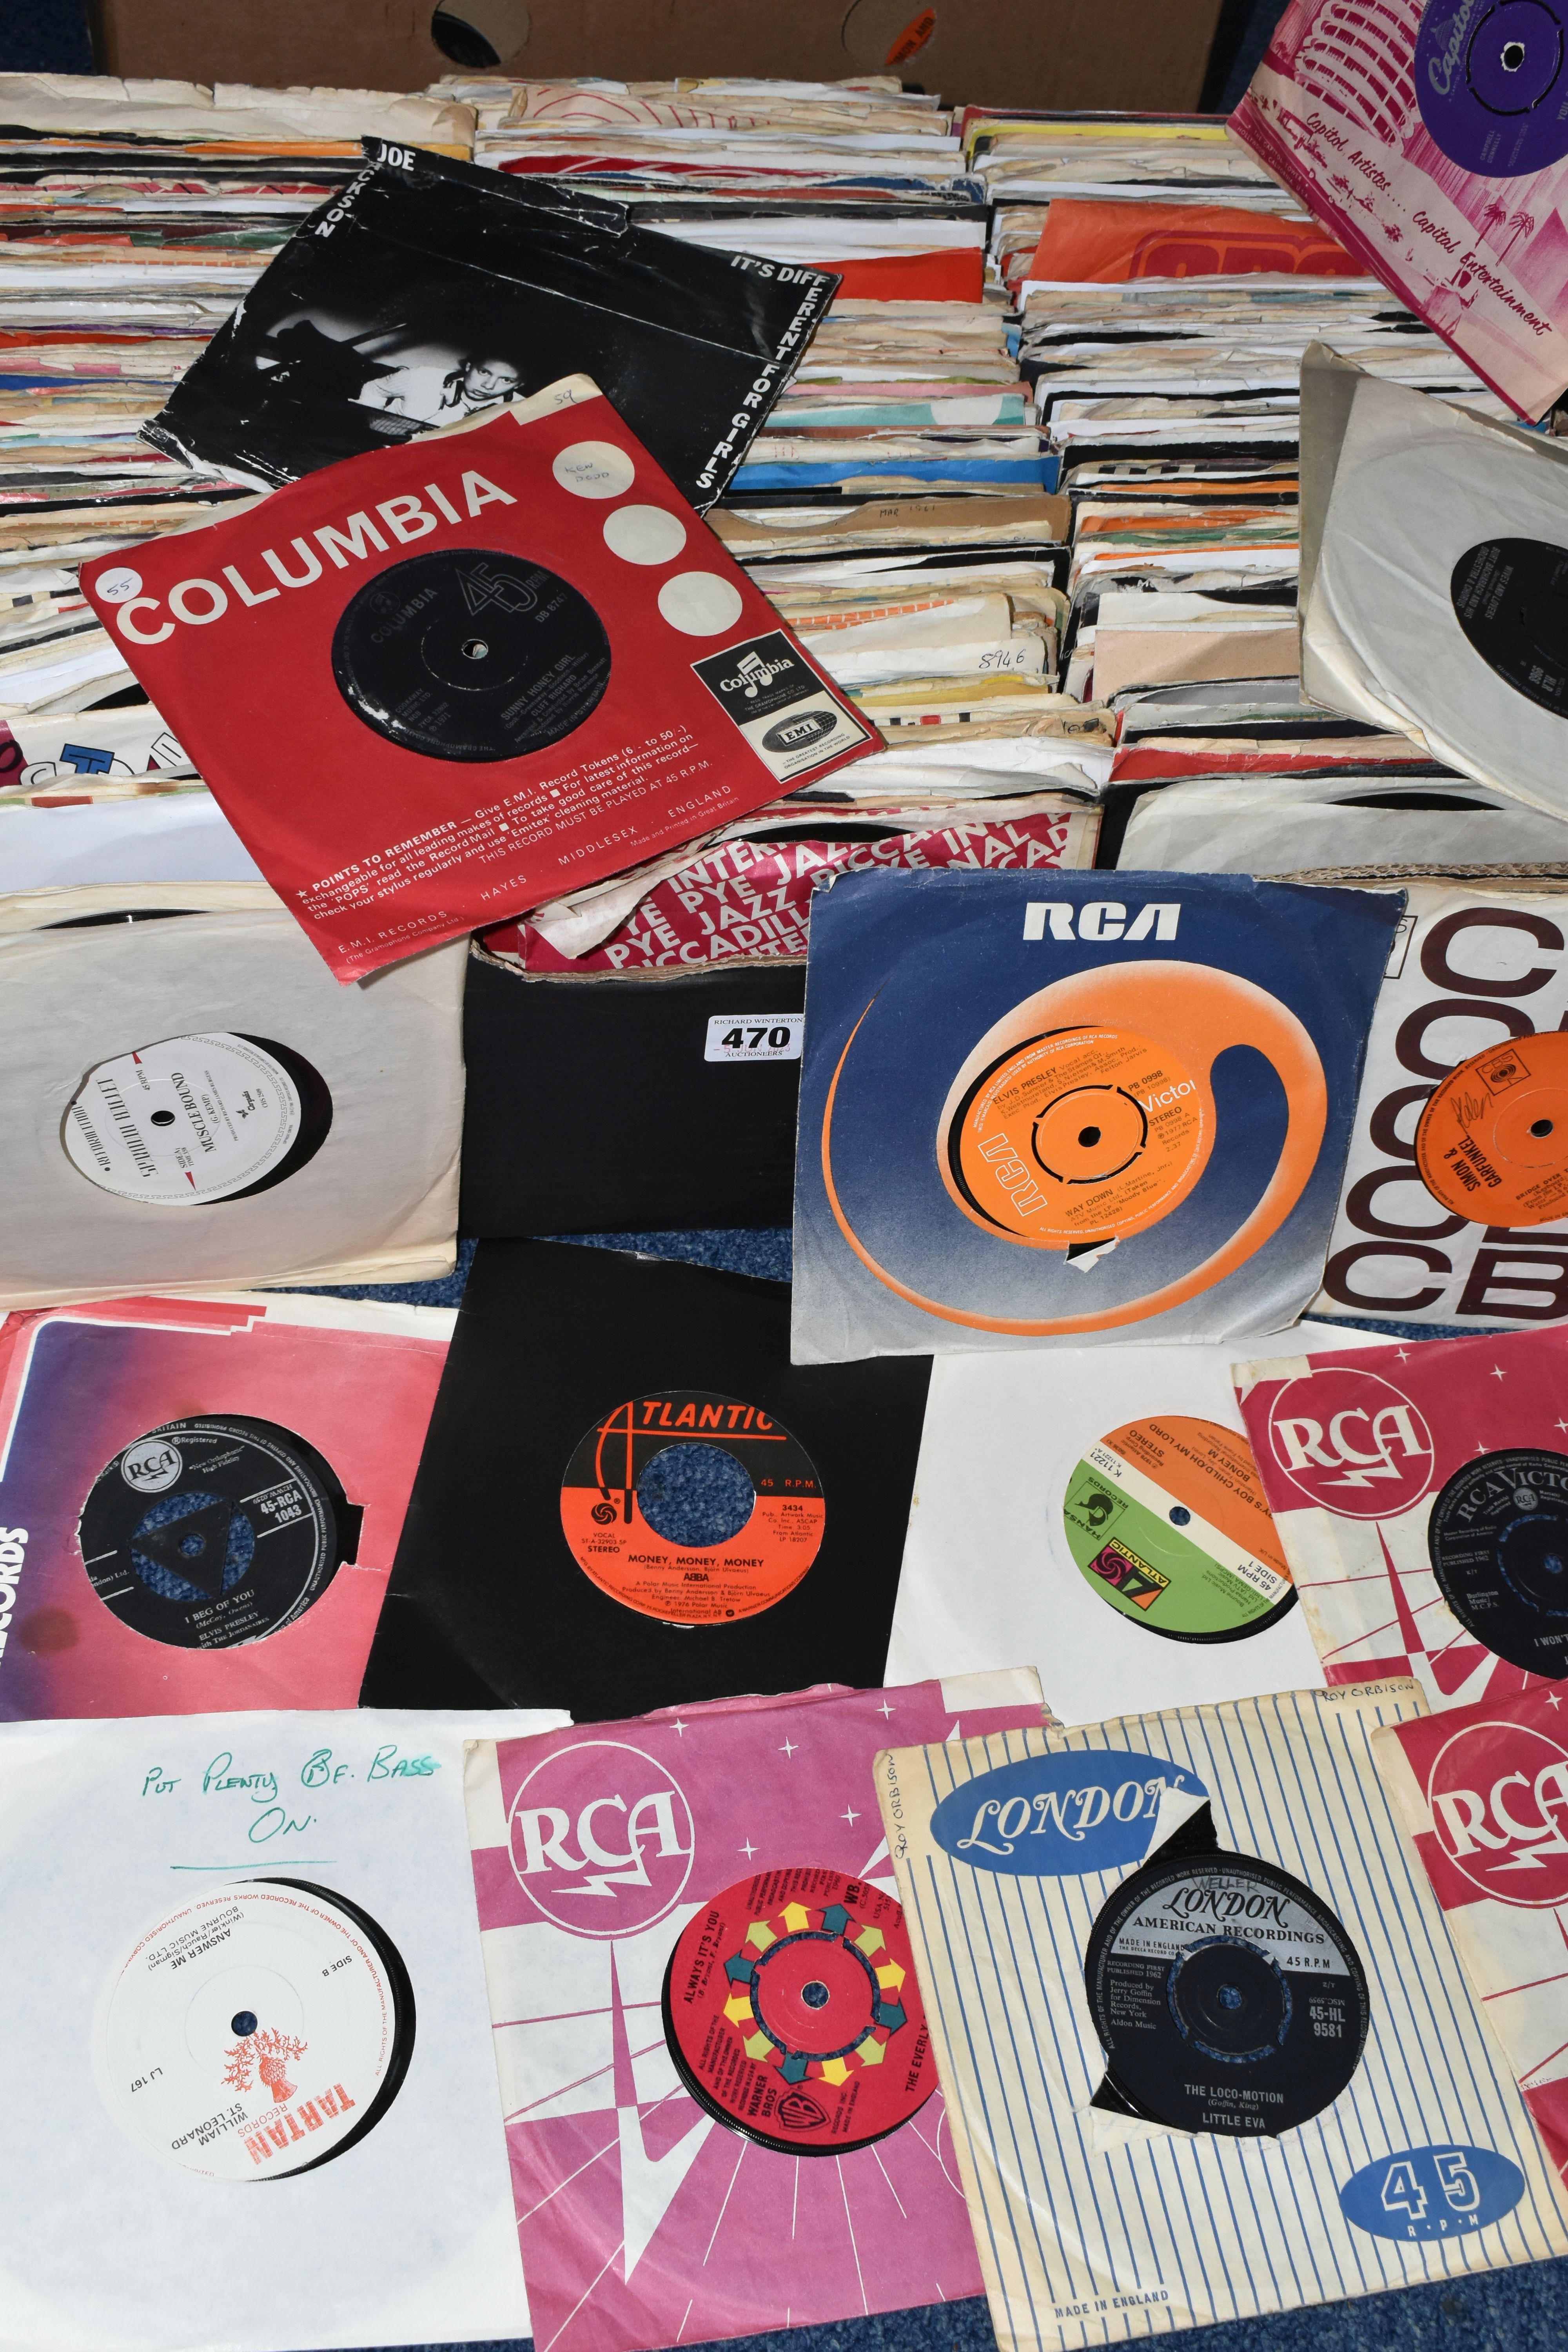 A BOX OF VINYL SINGLES, over three hundred records, artists to include Elvis Presley, Simon and